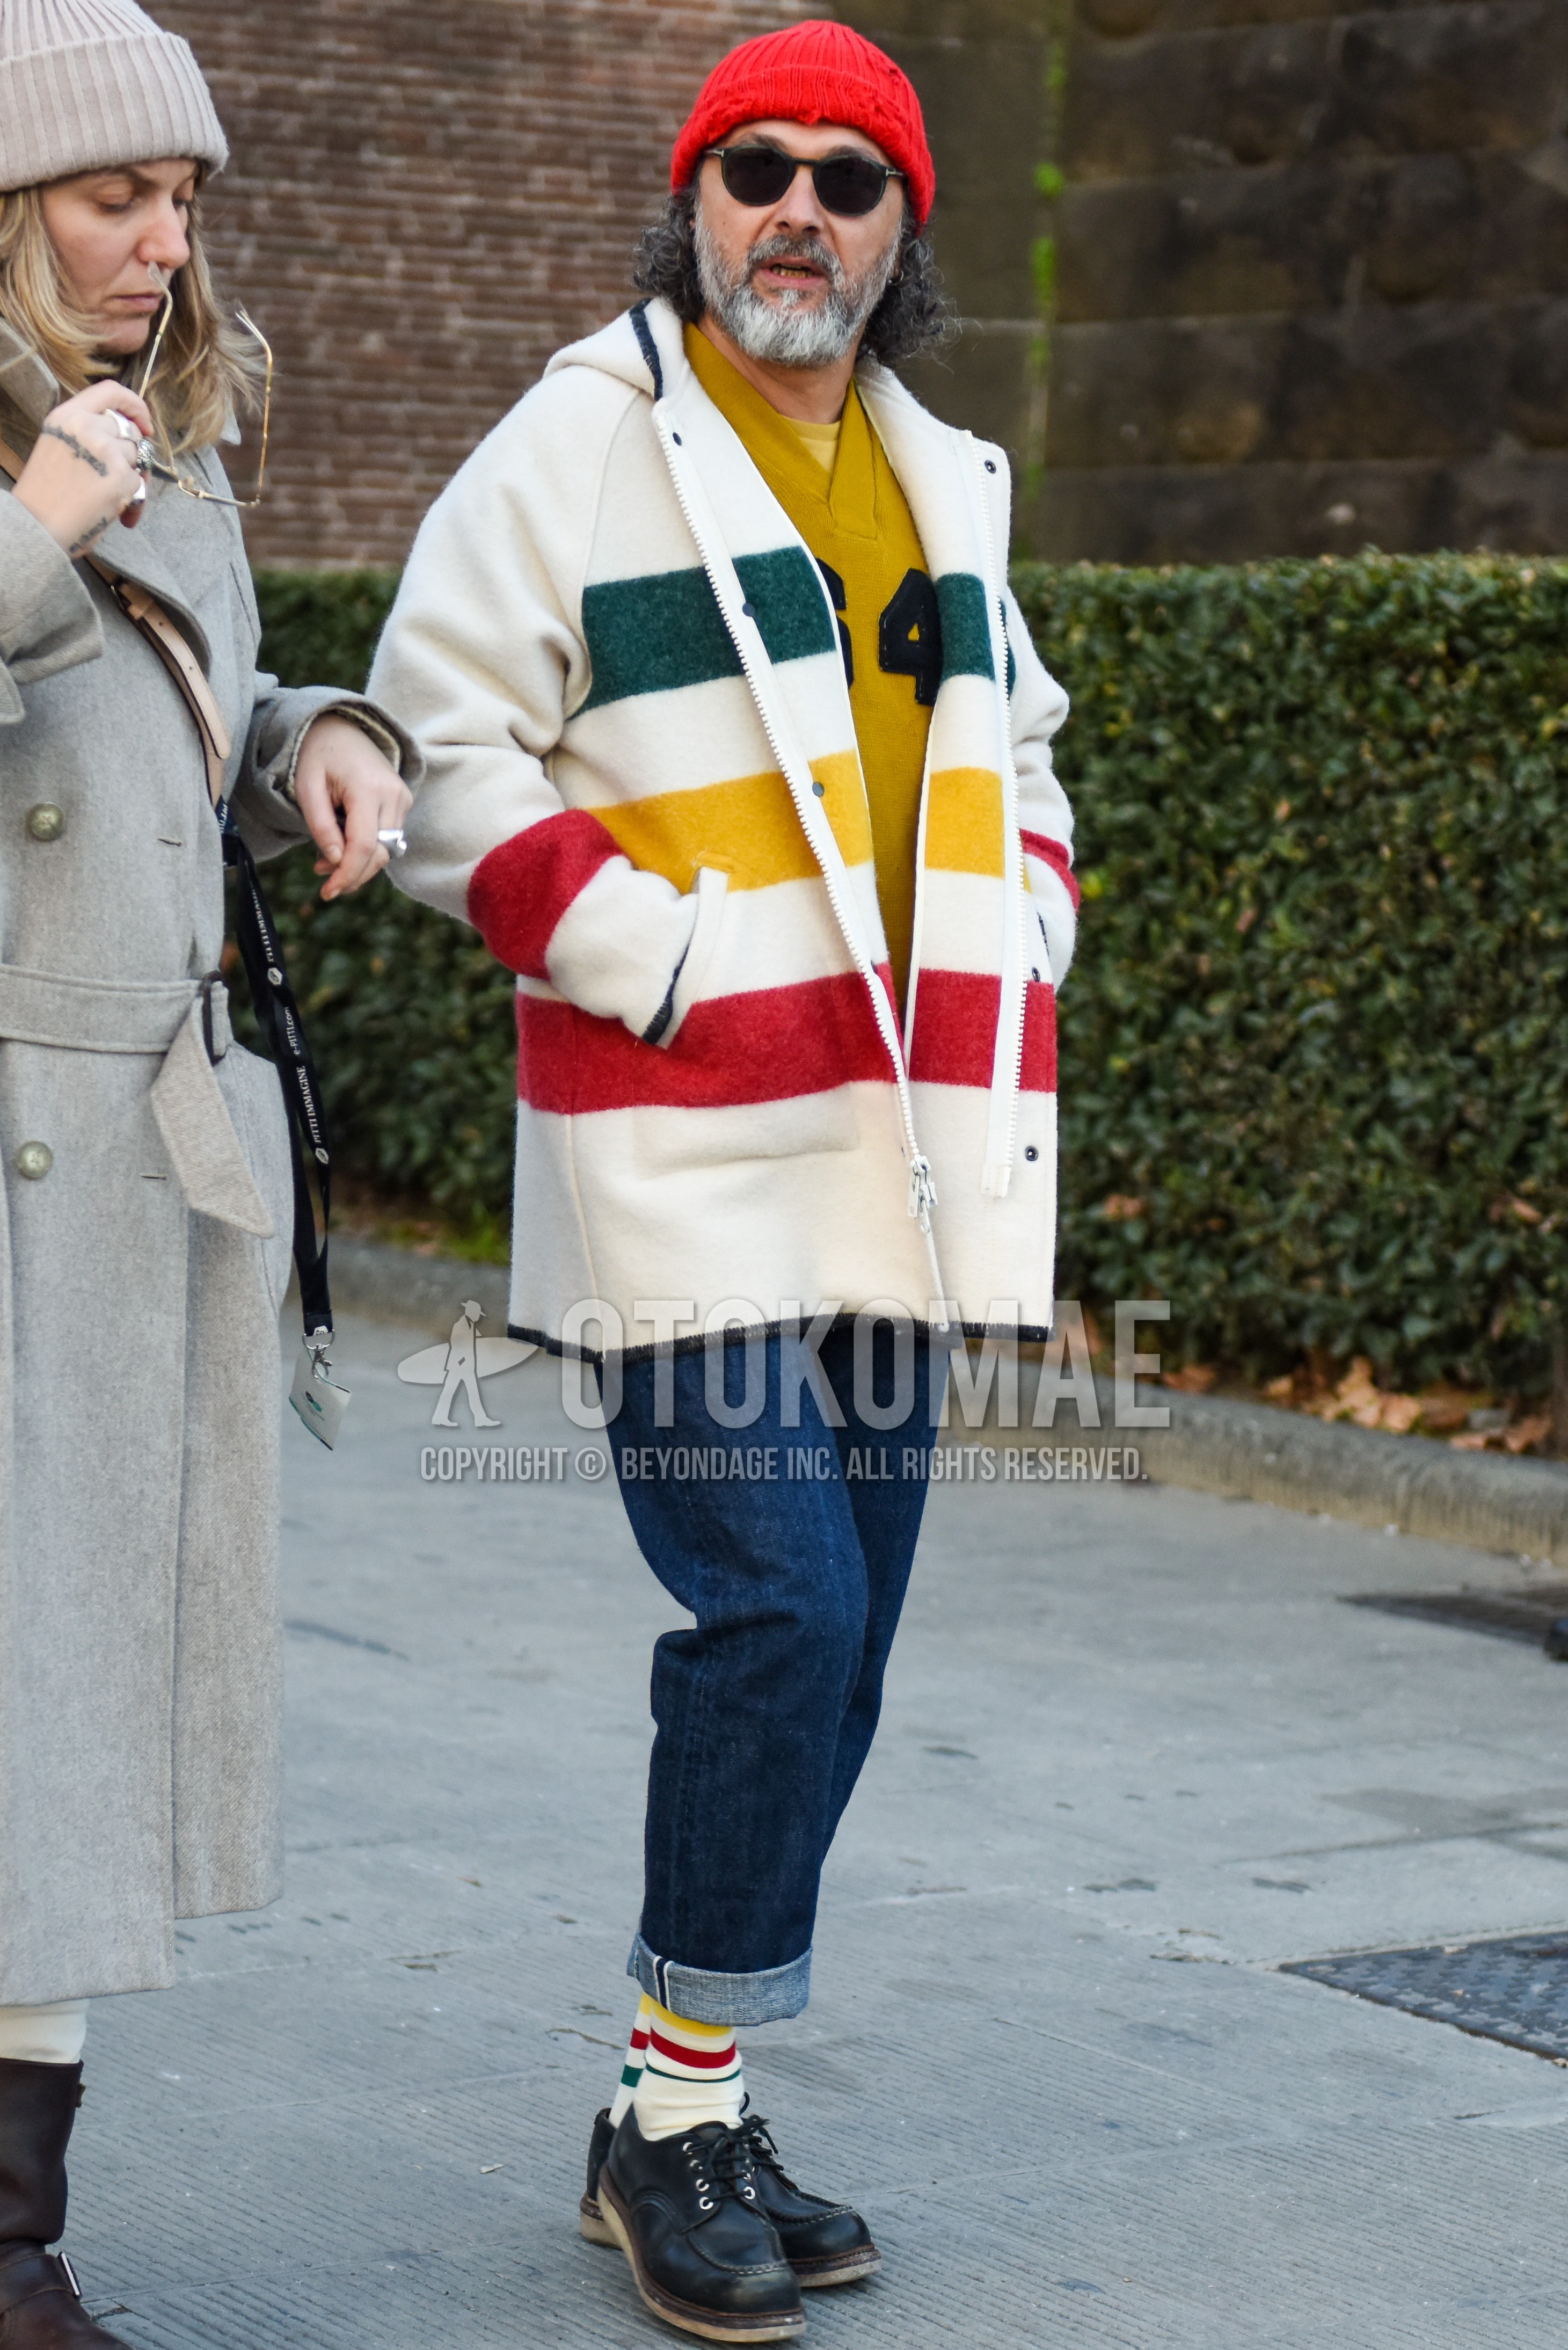 Men's autumn winter outfit with red plain knit cap, black plain sunglasses, white horizontal stripes hooded coat, yellow lettered sweatshirt, navy plain denim/jeans, white horizontal stripes socks, black u-tip shoes leather shoes.